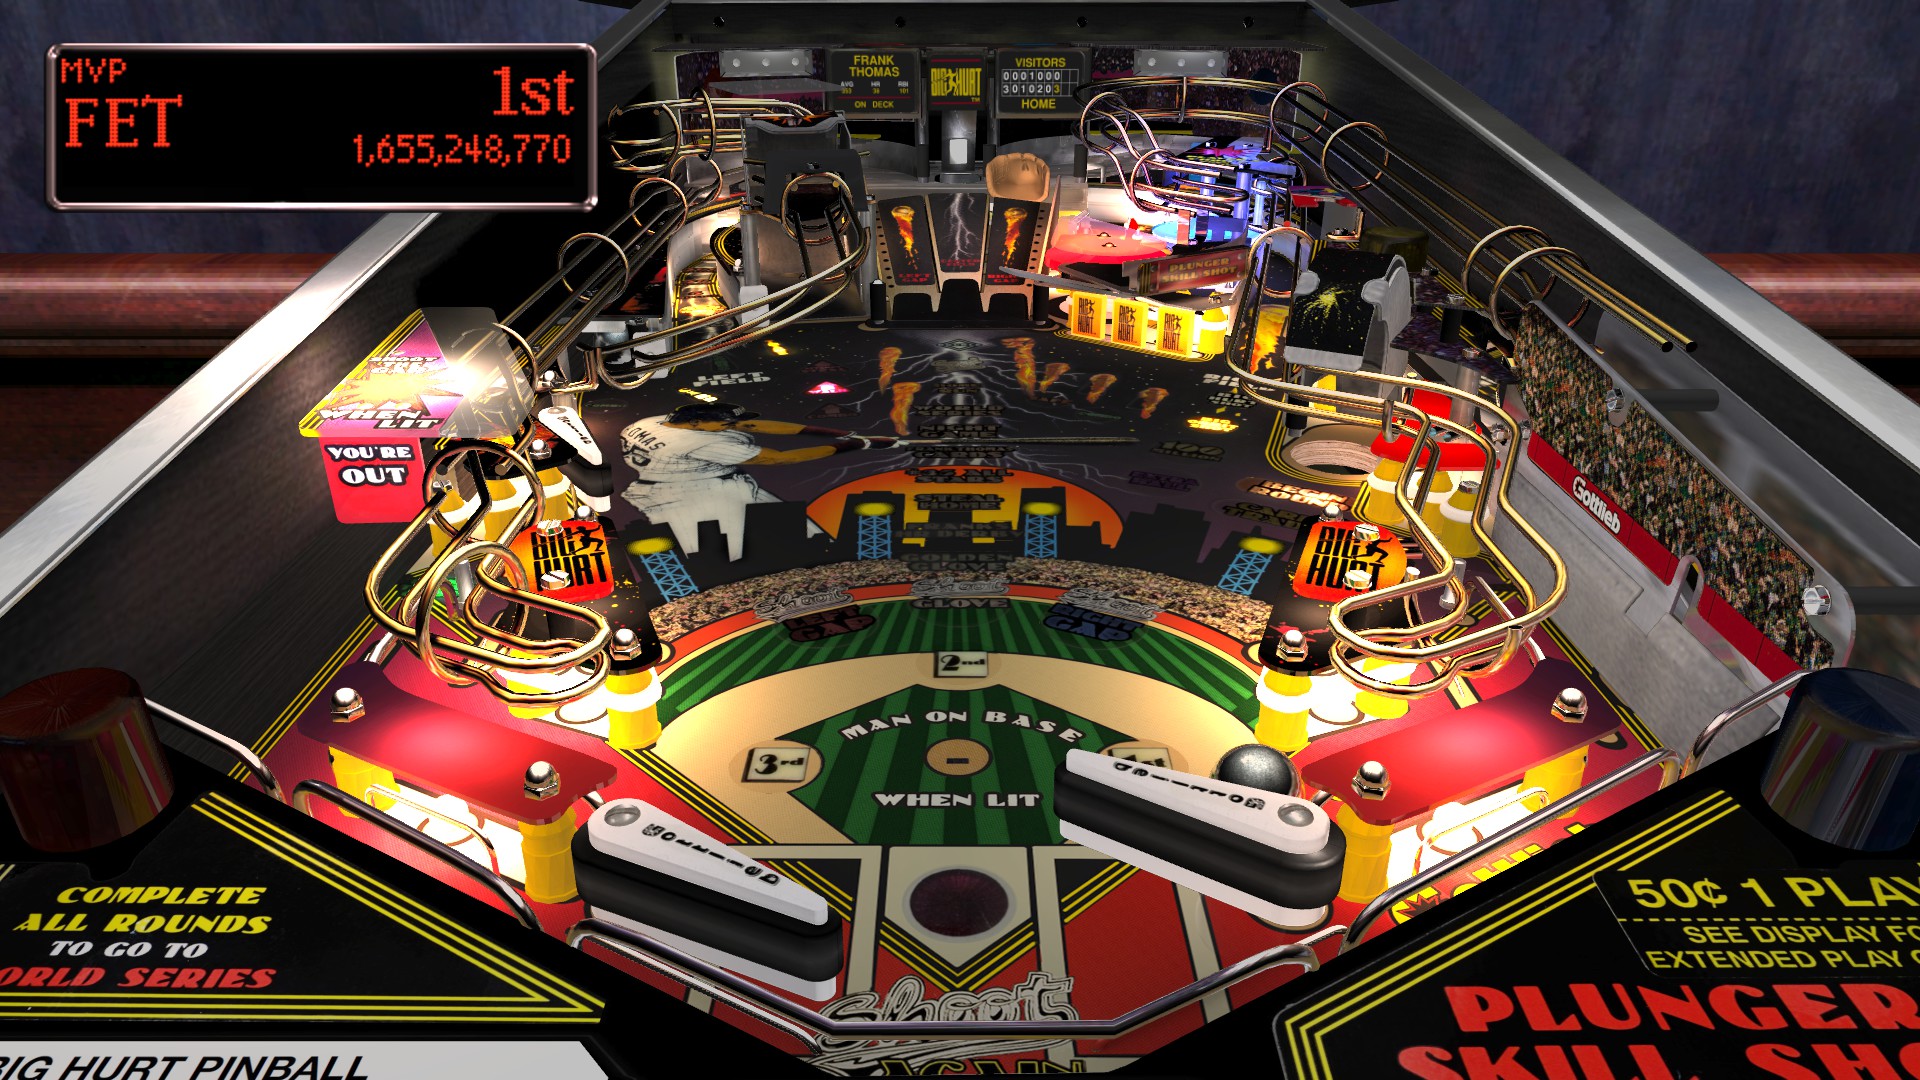 Gebakjes troon Wat mensen betreft The Pinball Arcade Gottlieb Table Pack 1 Review | Bonus Stage is the  world's leading source for Playstation 5, Xbox Series X, Nintendo Switch,  PC, Playstation 4, Xbox One, 3DS, Wii U,